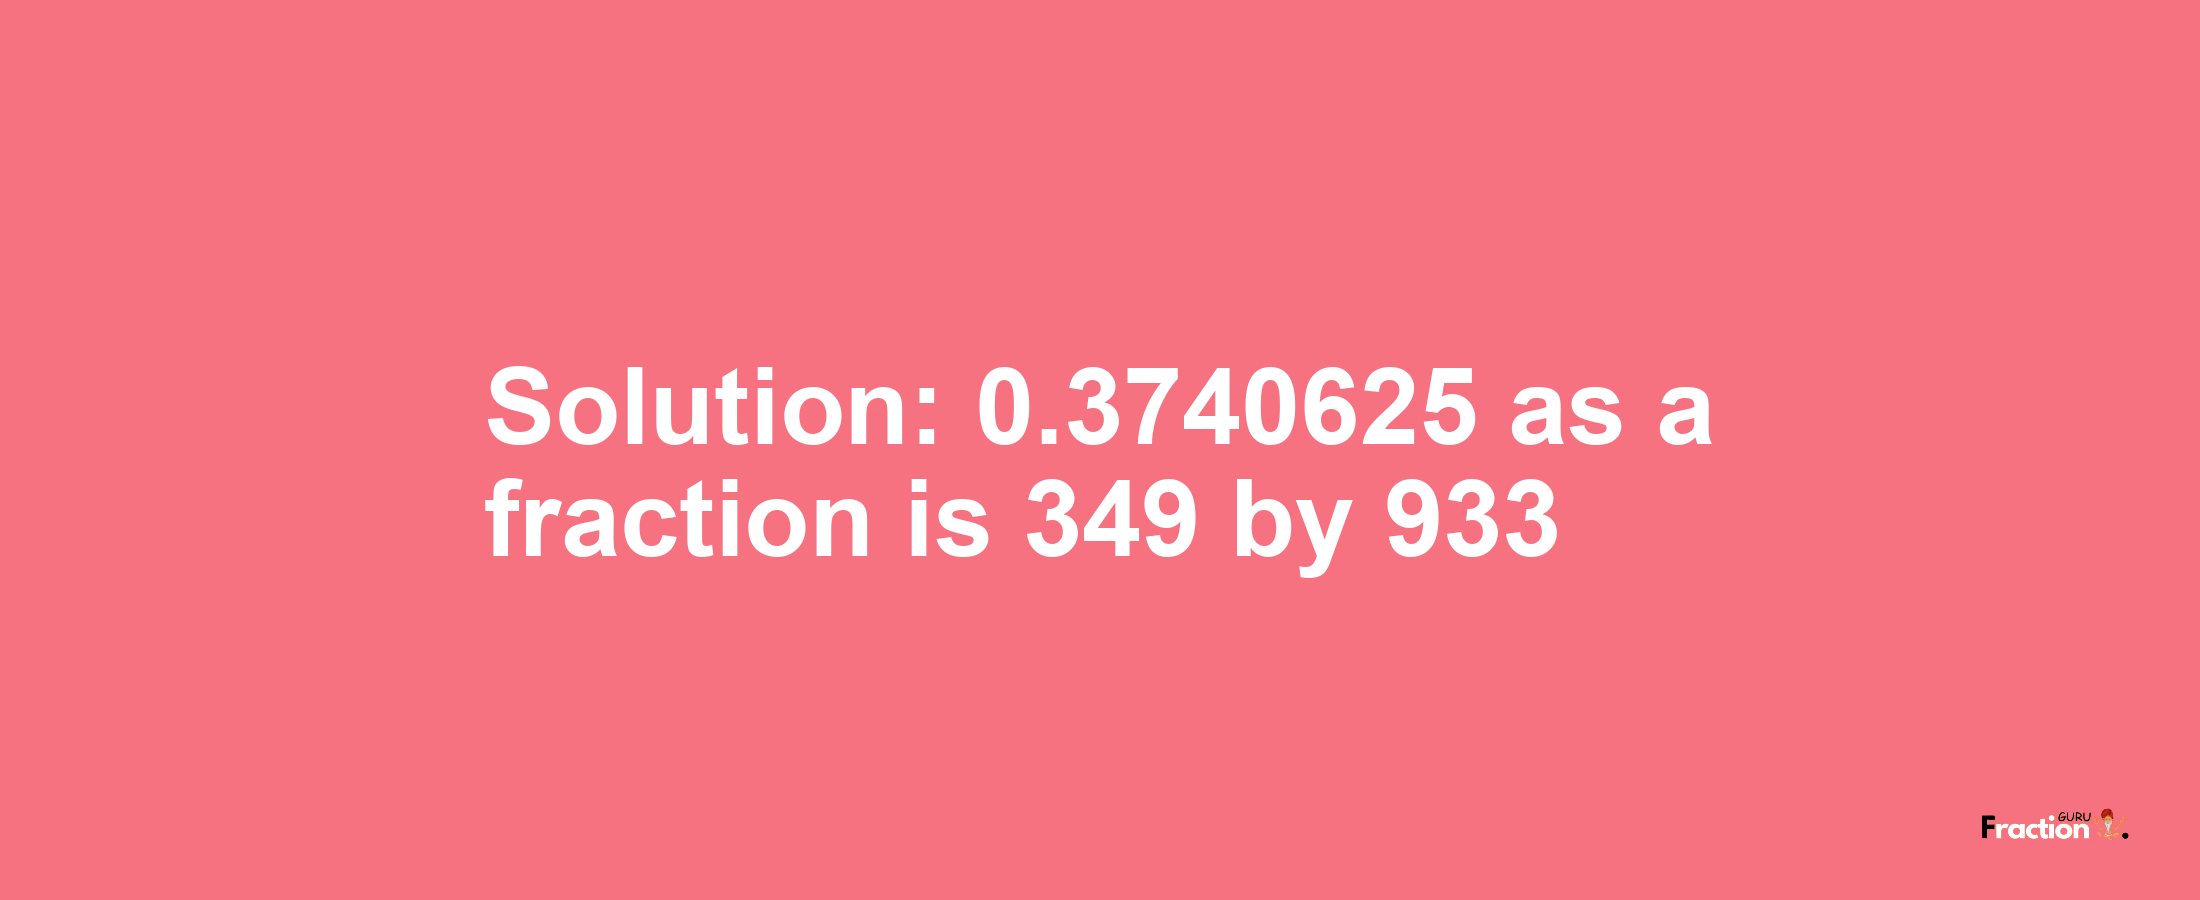 Solution:0.3740625 as a fraction is 349/933